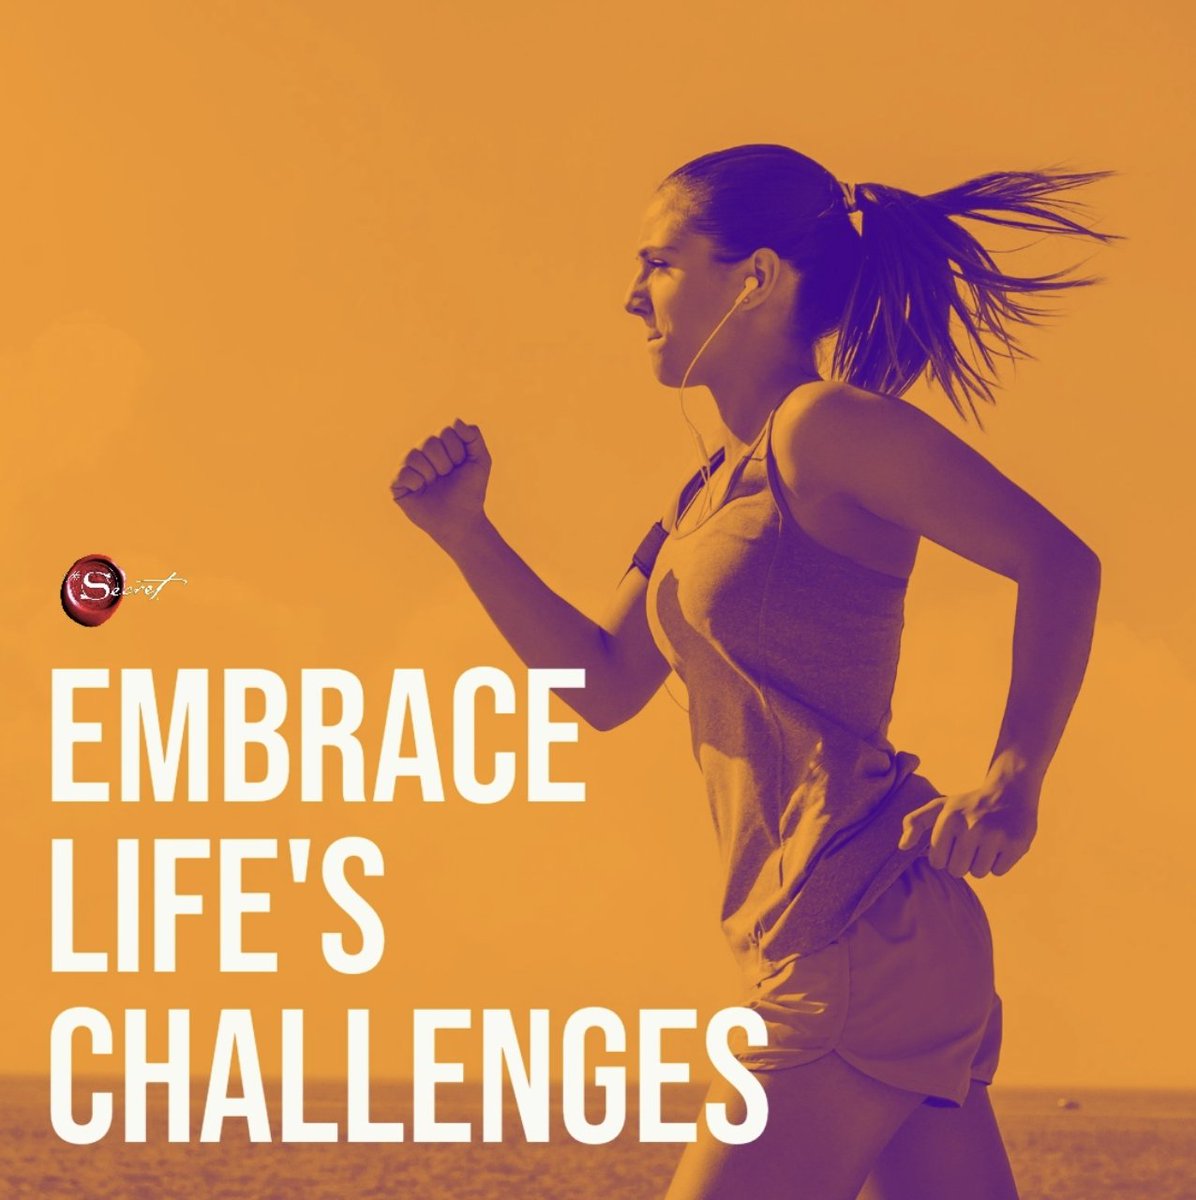 Embrace life's challenges.